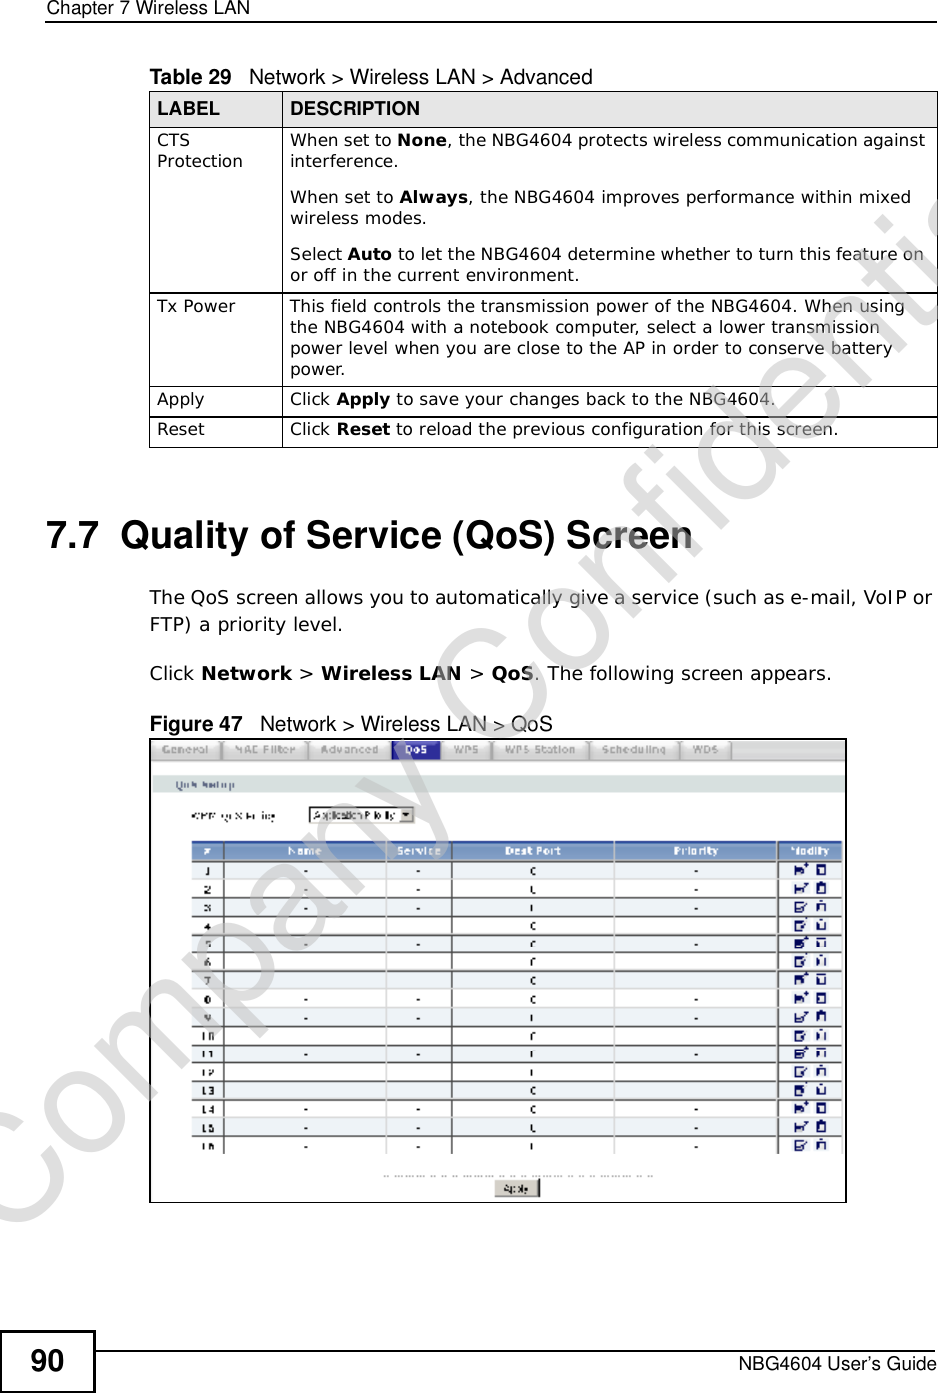 Chapter 7Wireless LANNBG4604 User’s Guide907.7  Quality of Service (QoS) ScreenThe QoS screen allows you to automatically give a service (such as e-mail, VoIP or FTP) a priority level.Click Network &gt; Wireless LAN &gt; QoS. The following screen appears.Figure 47   Network &gt; Wireless LAN &gt; QoS CTS Protection When set to None, the NBG4604 protects wireless communication against interference.When set to Always, the NBG4604 improves performance within mixed wireless modes.Select Auto to let the NBG4604 determine whether to turn this feature on or off in the current environment. Tx PowerThis field controls the transmission power of the NBG4604. When using the NBG4604 with a notebook computer, select a lower transmission power level when you are close to the AP in order to conserve battery power.Apply Click Apply to save your changes back to the NBG4604.Reset Click Reset to reload the previous configuration for this screen.Table 29   Network &gt; Wireless LAN &gt; AdvancedLABEL DESCRIPTIONCompany Confidential